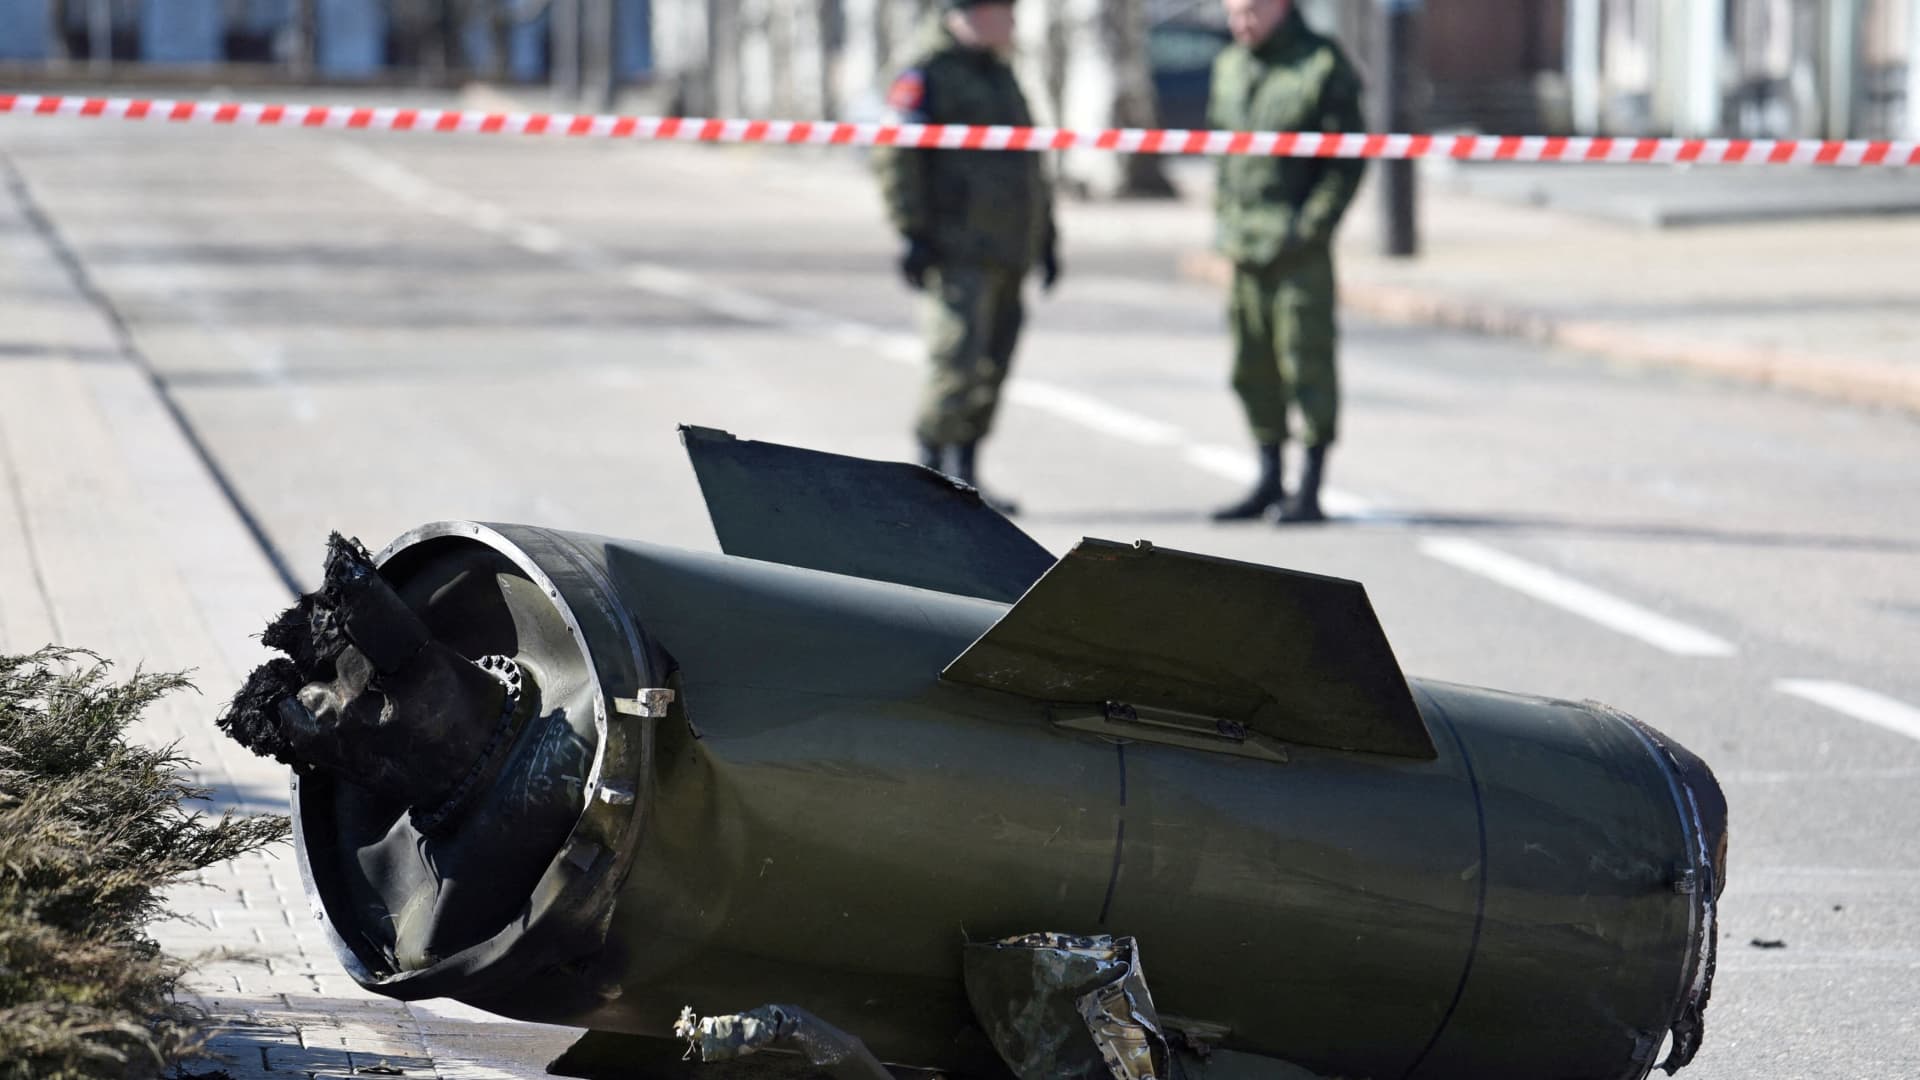 A fragment of a missile is seen in the street after shelling in the separatist-controlled city of Donetsk, Ukraine March 14, 2022.